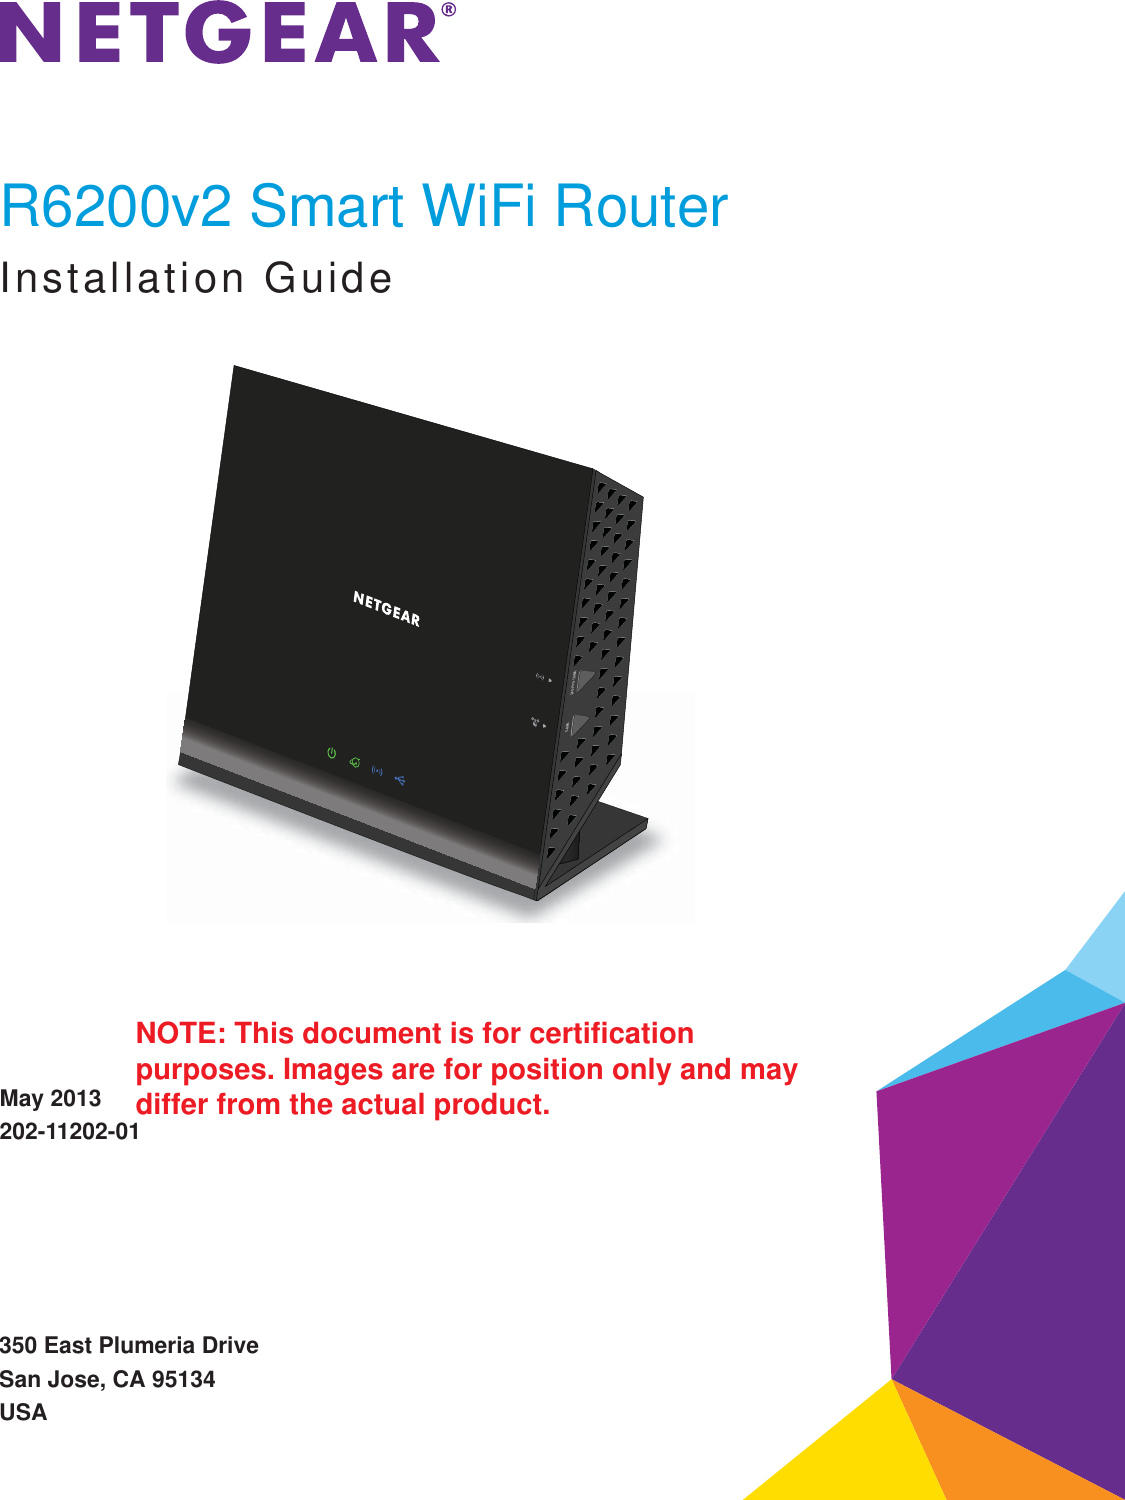 350 East Plumeria DriveSan Jose, CA 95134USAMay 2013202-11202-01R6200v2 Smart WiFi RouterInstallation GuideNOTE: This document is for certification purposes. Images are for position only and may differ from the actual product.